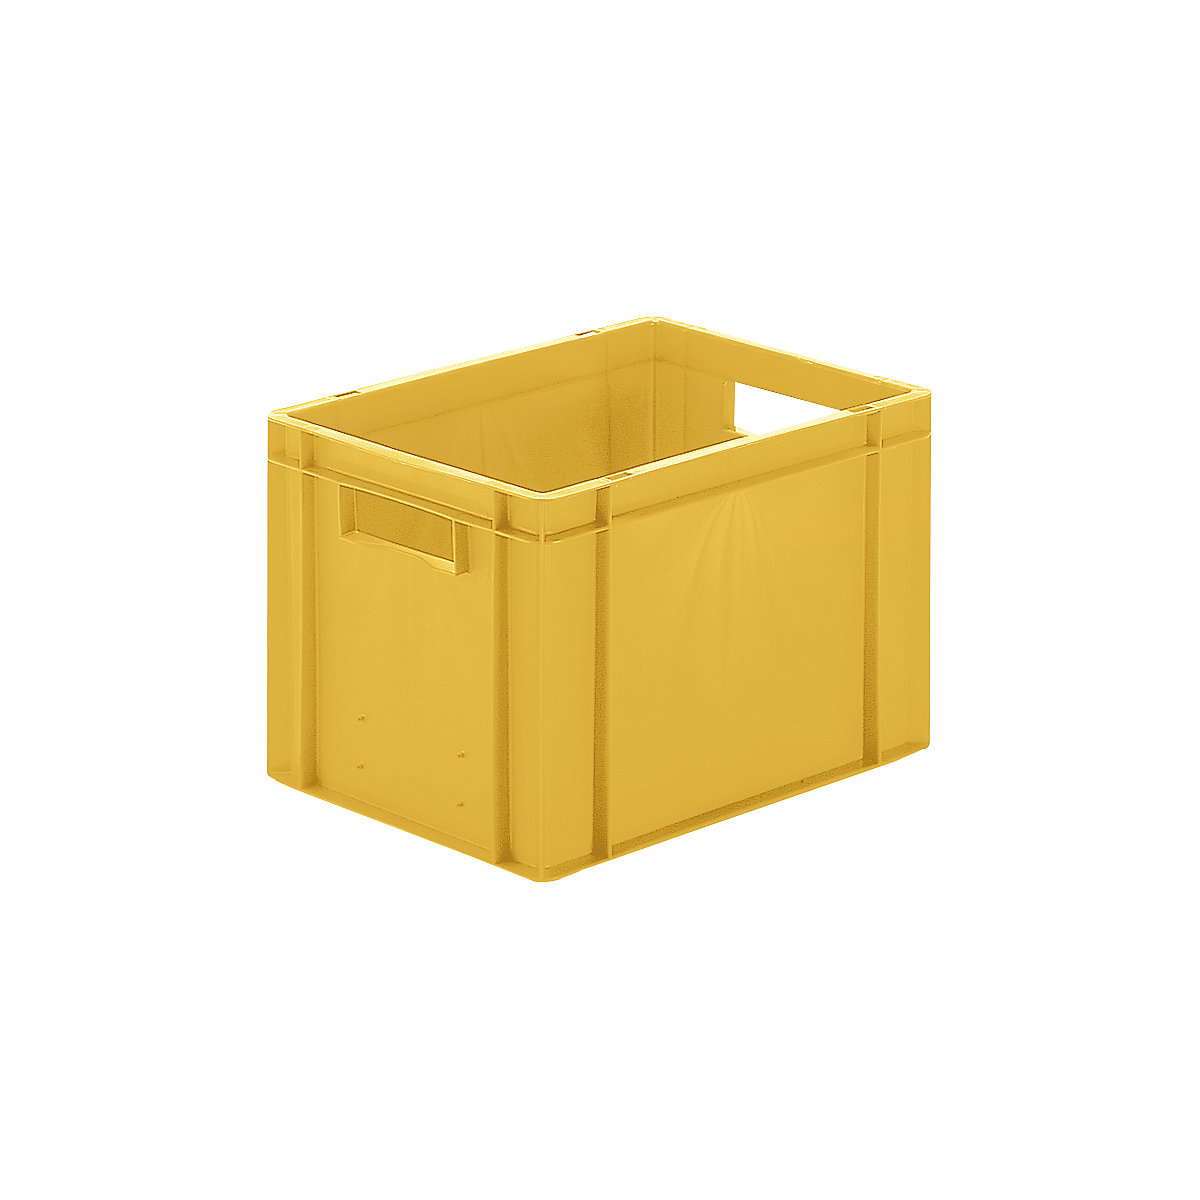 Euro stacking container, closed walls and base, LxWxH 400 x 300 x 270 mm, yellow, pack of 5-6